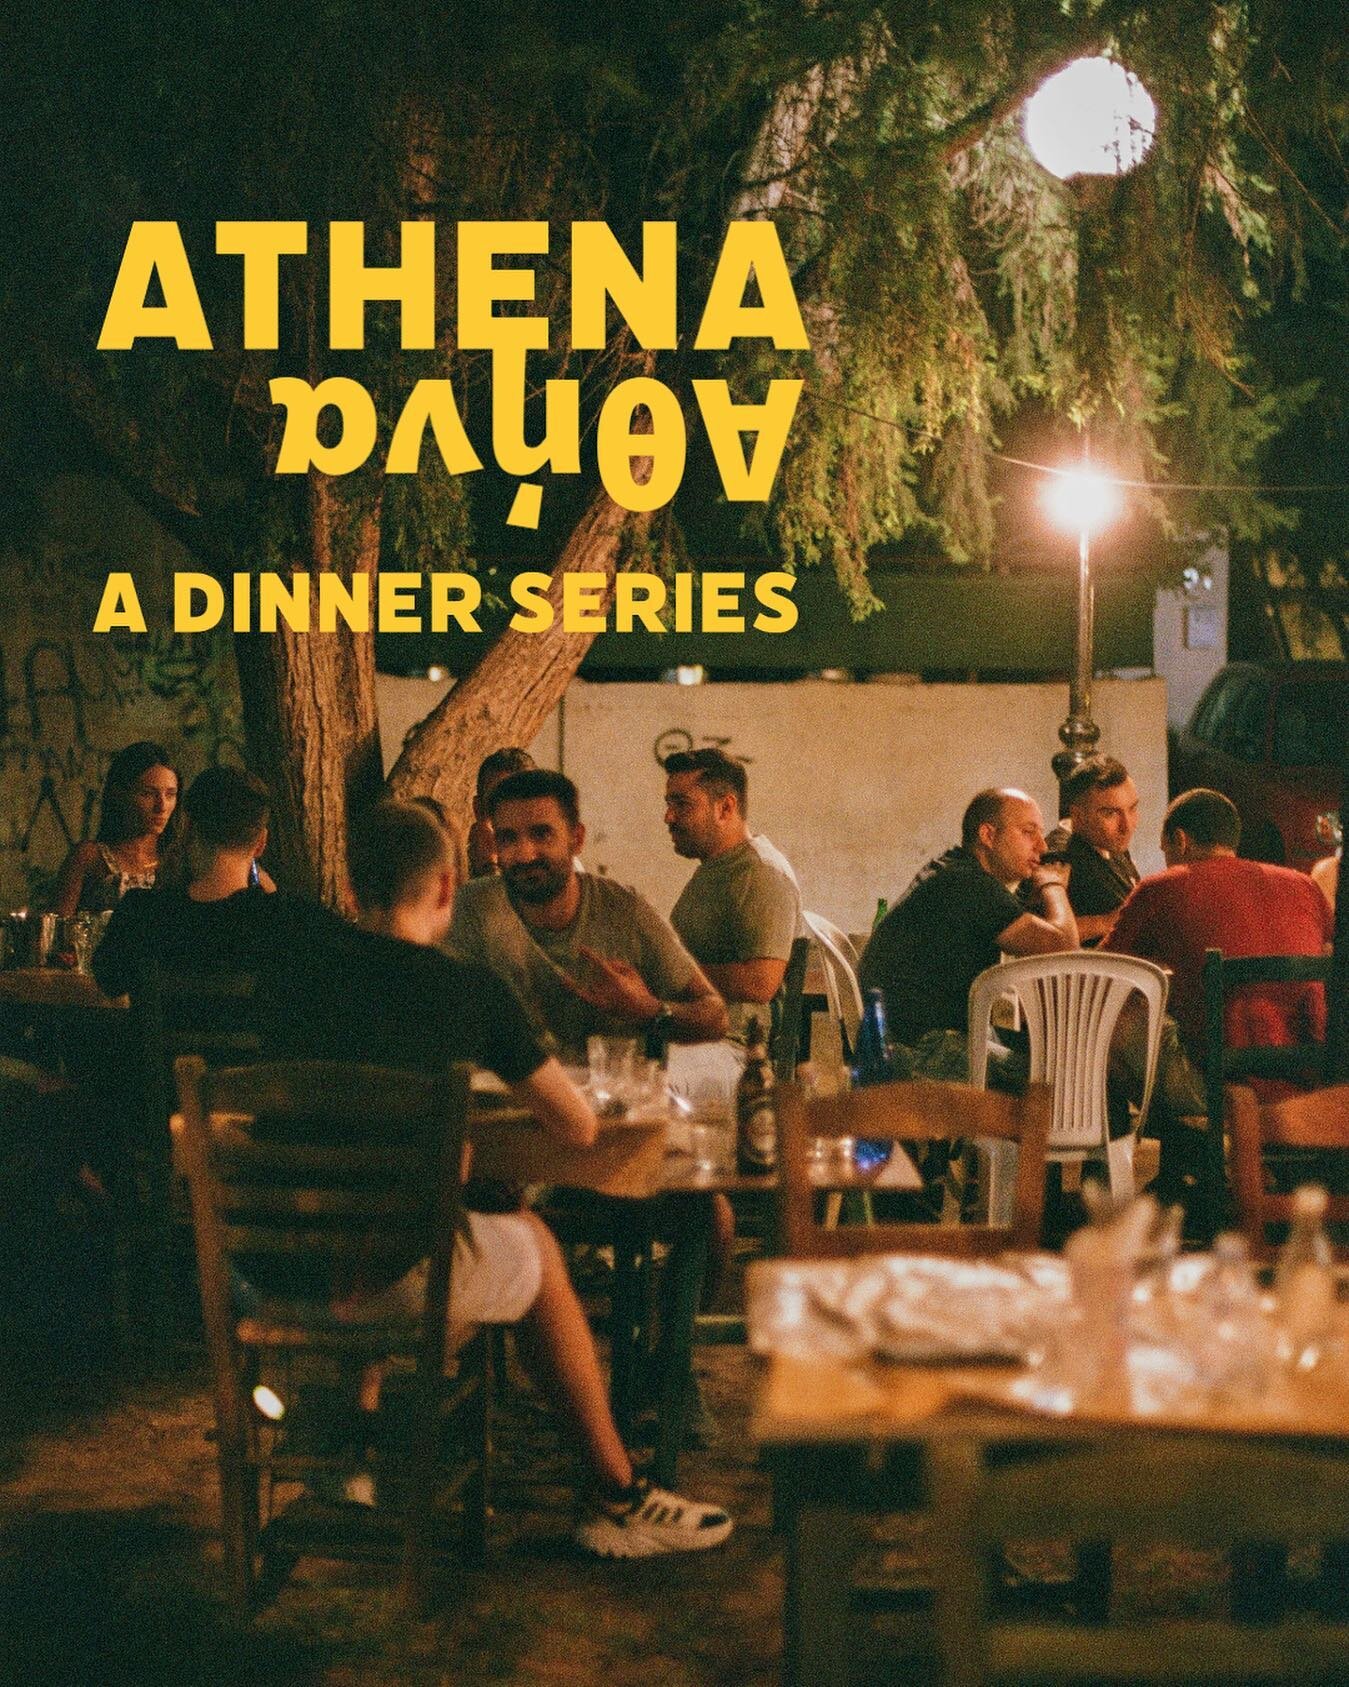 It's that time again! Join us for August's @athenadinners celebrating seasonal bounty with an array of dishes highlighting pinnacle Grecian summer ethos ☀️

LiNk iN BiO!